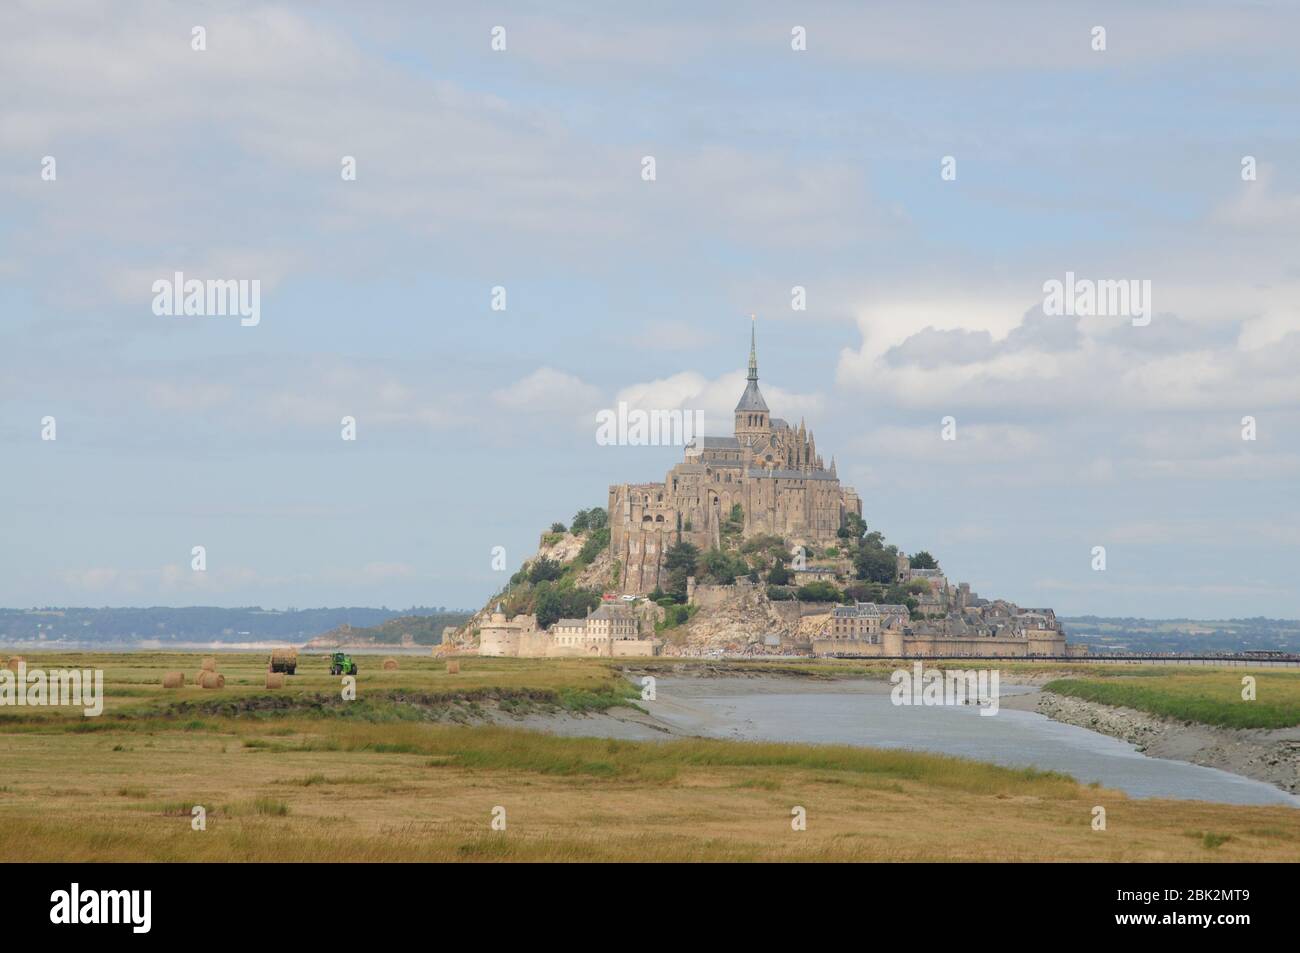 The historic rocky island of Le Mont St Michel in norther France, with ancient fortified buildings Stock Photo